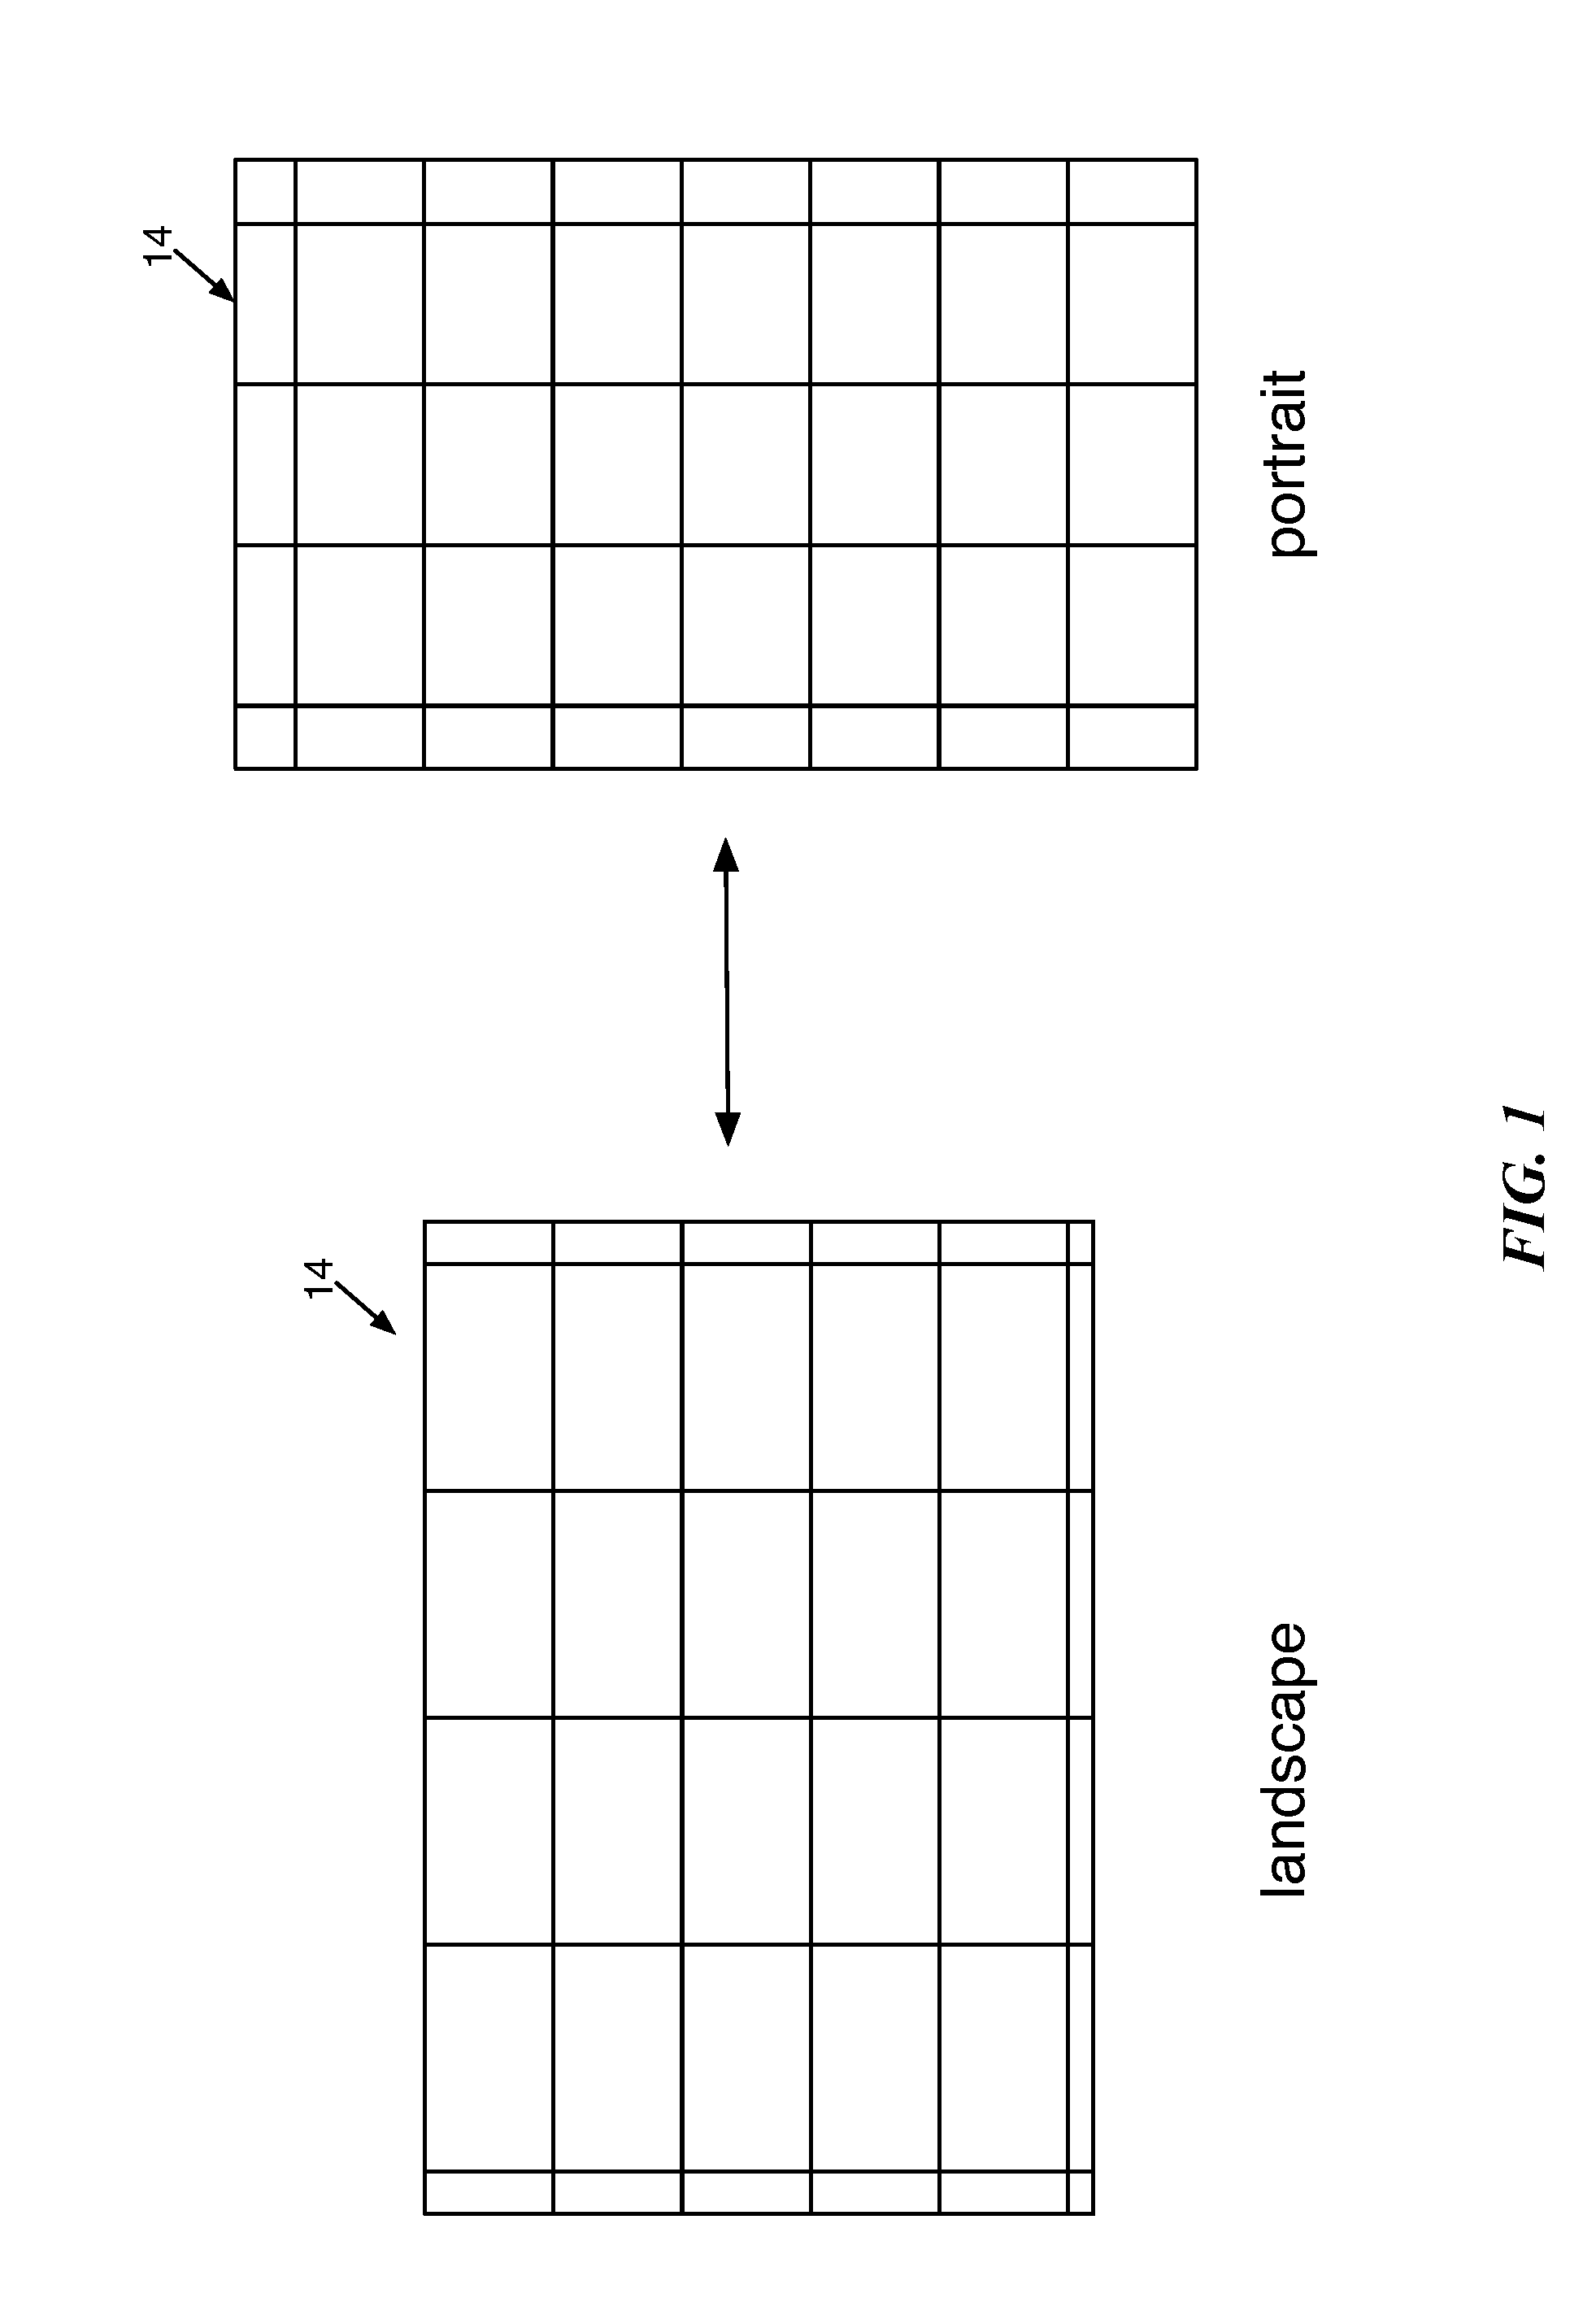 Controlling Element Layout on a Display